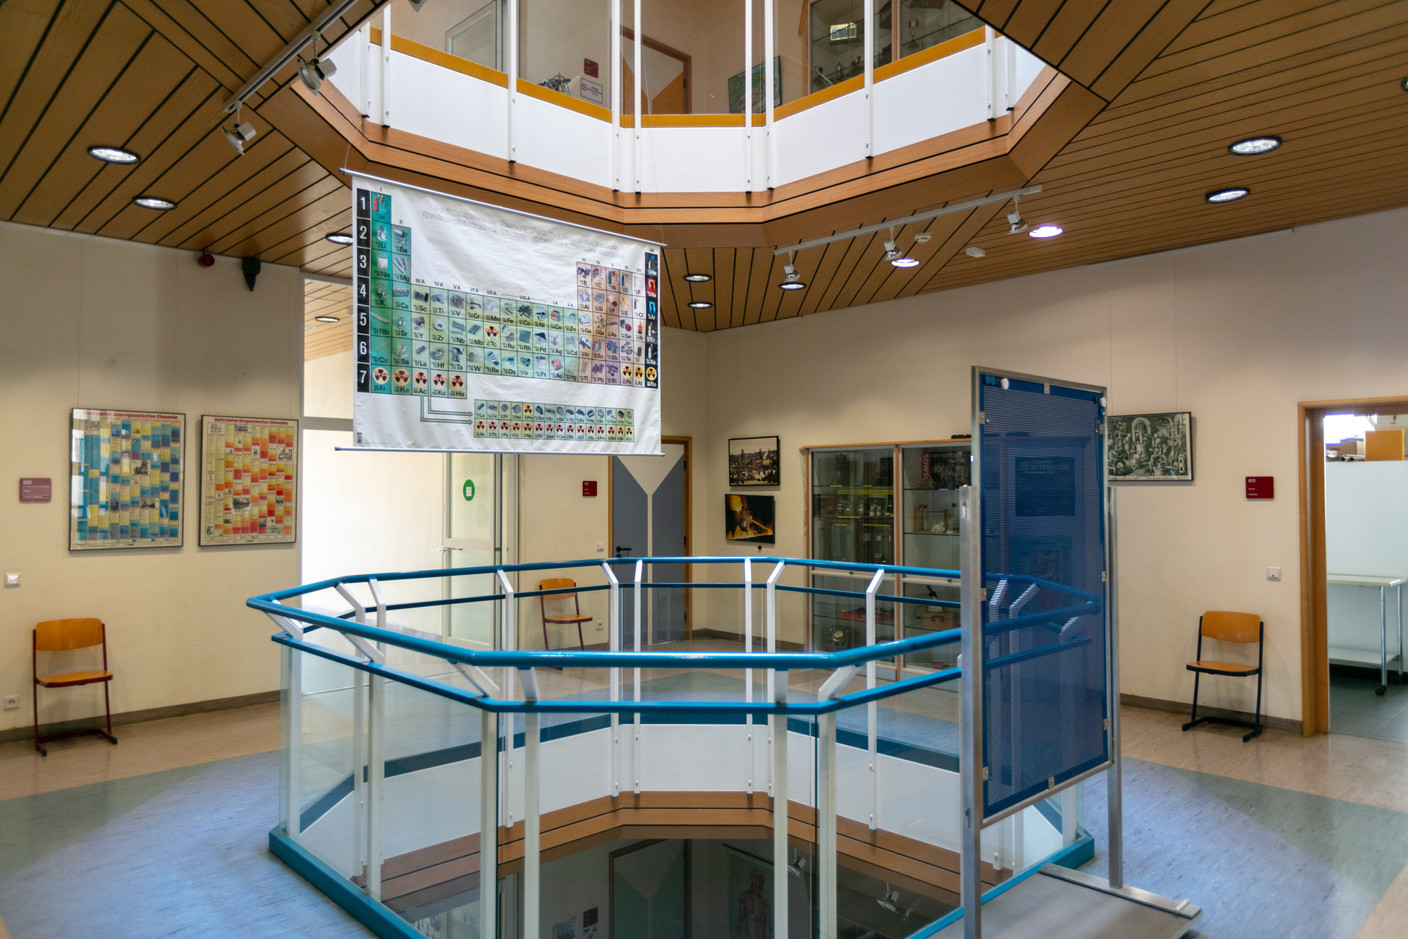 Another inside view of the school Romain Gamba / Maison Moderne